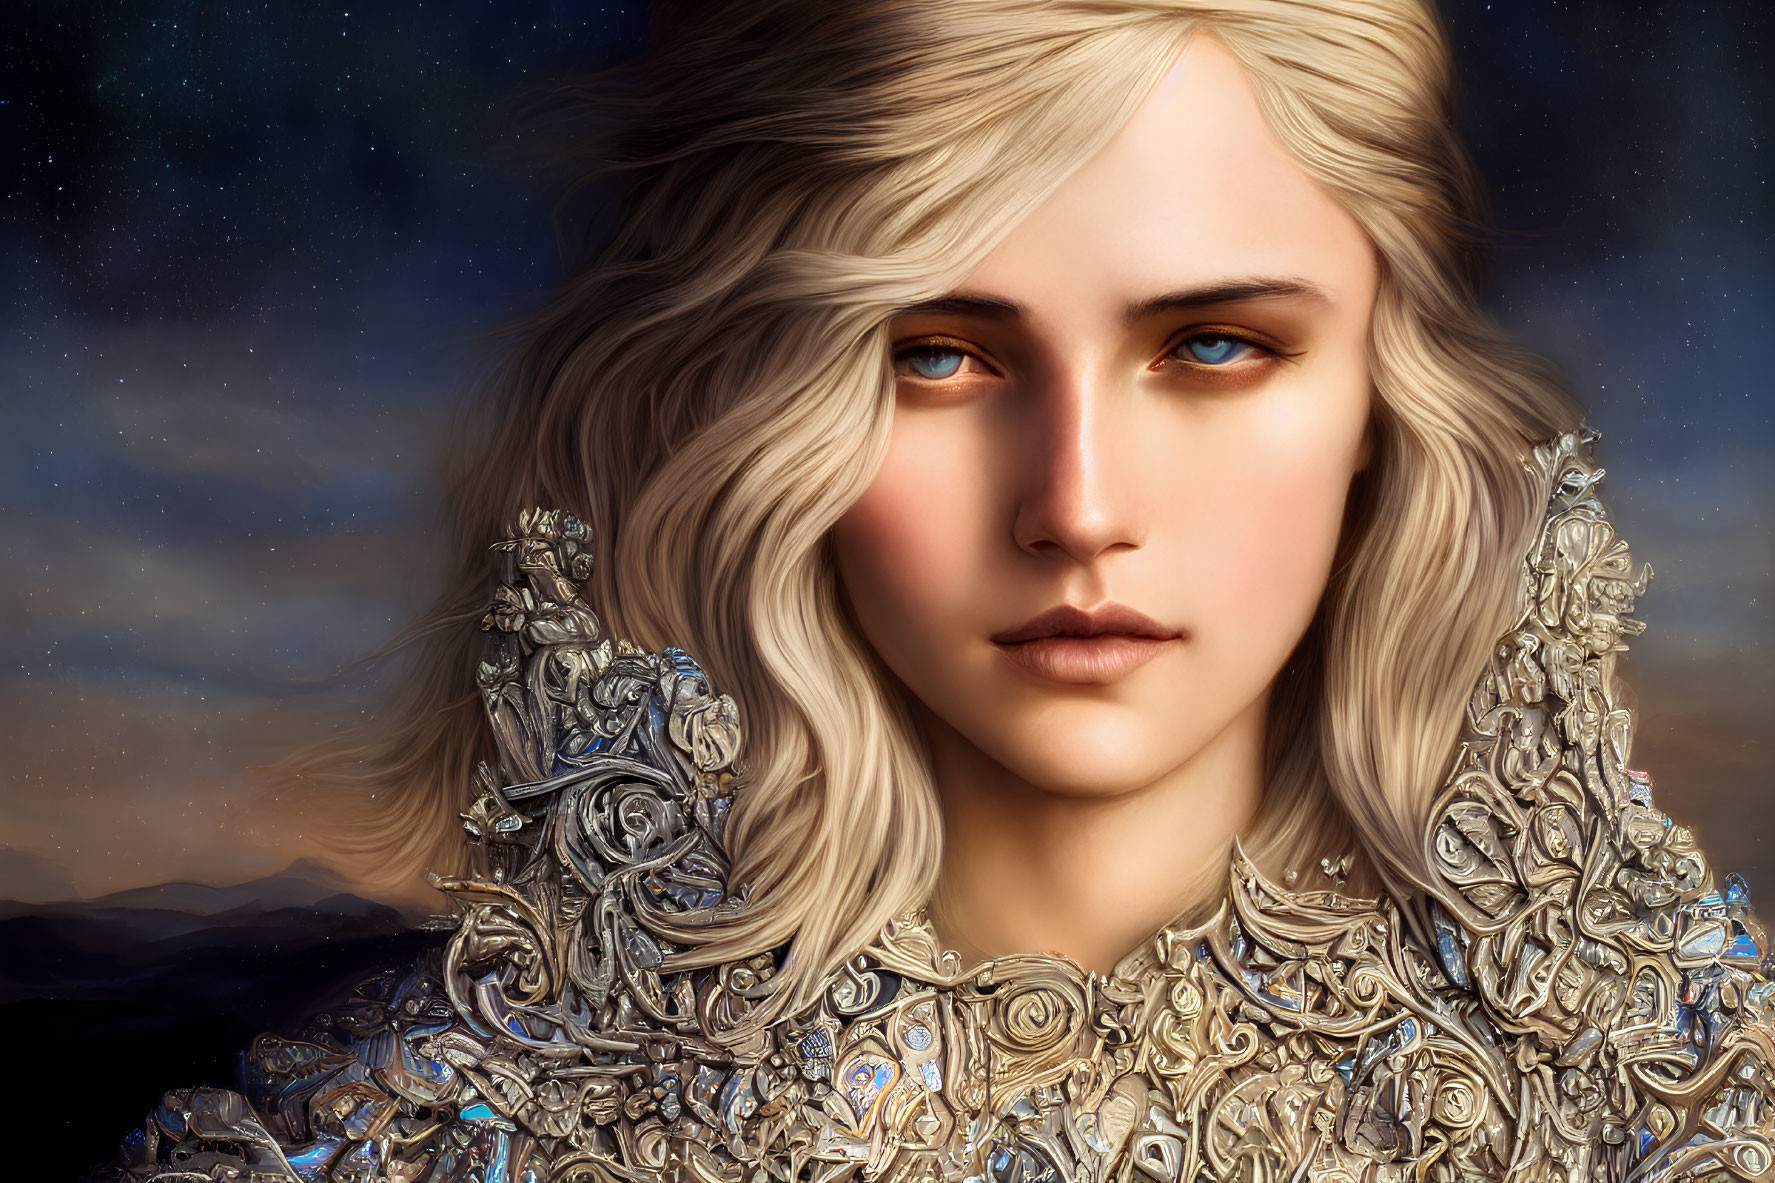 Digital artwork: Woman in silver armor with blond hair under starry sky